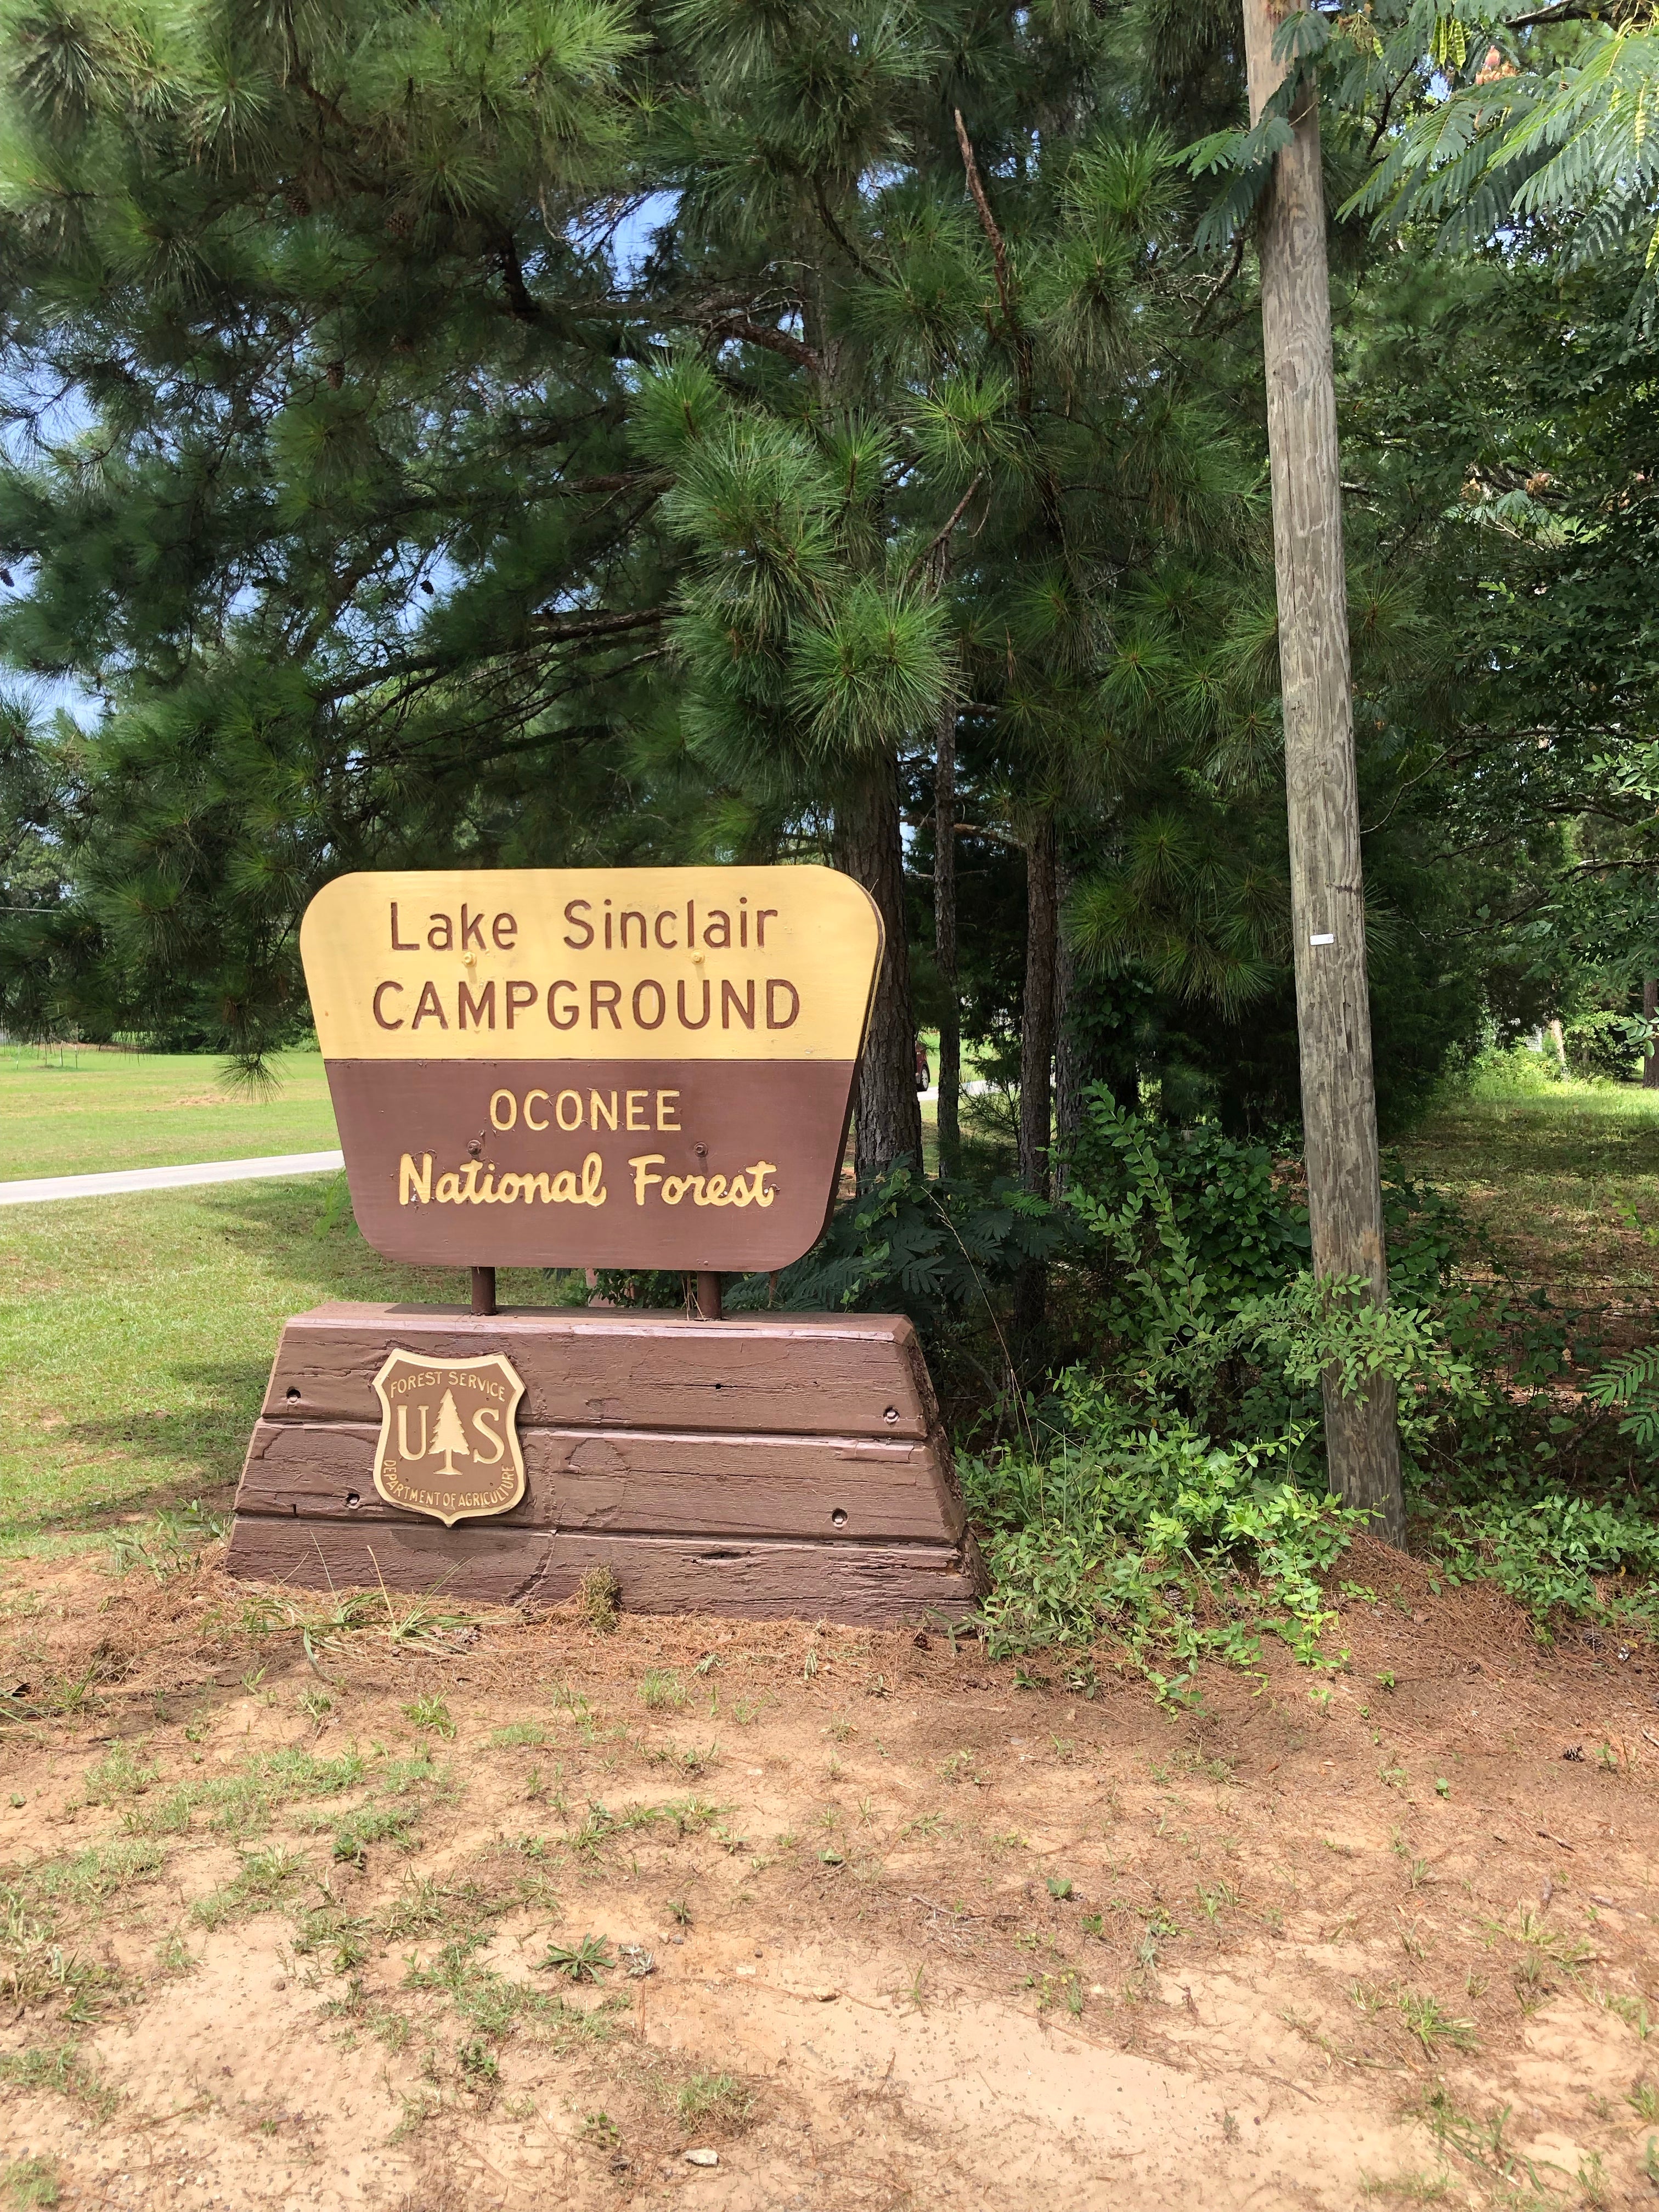 Camper submitted image from Lake Sinclair Campground - 1